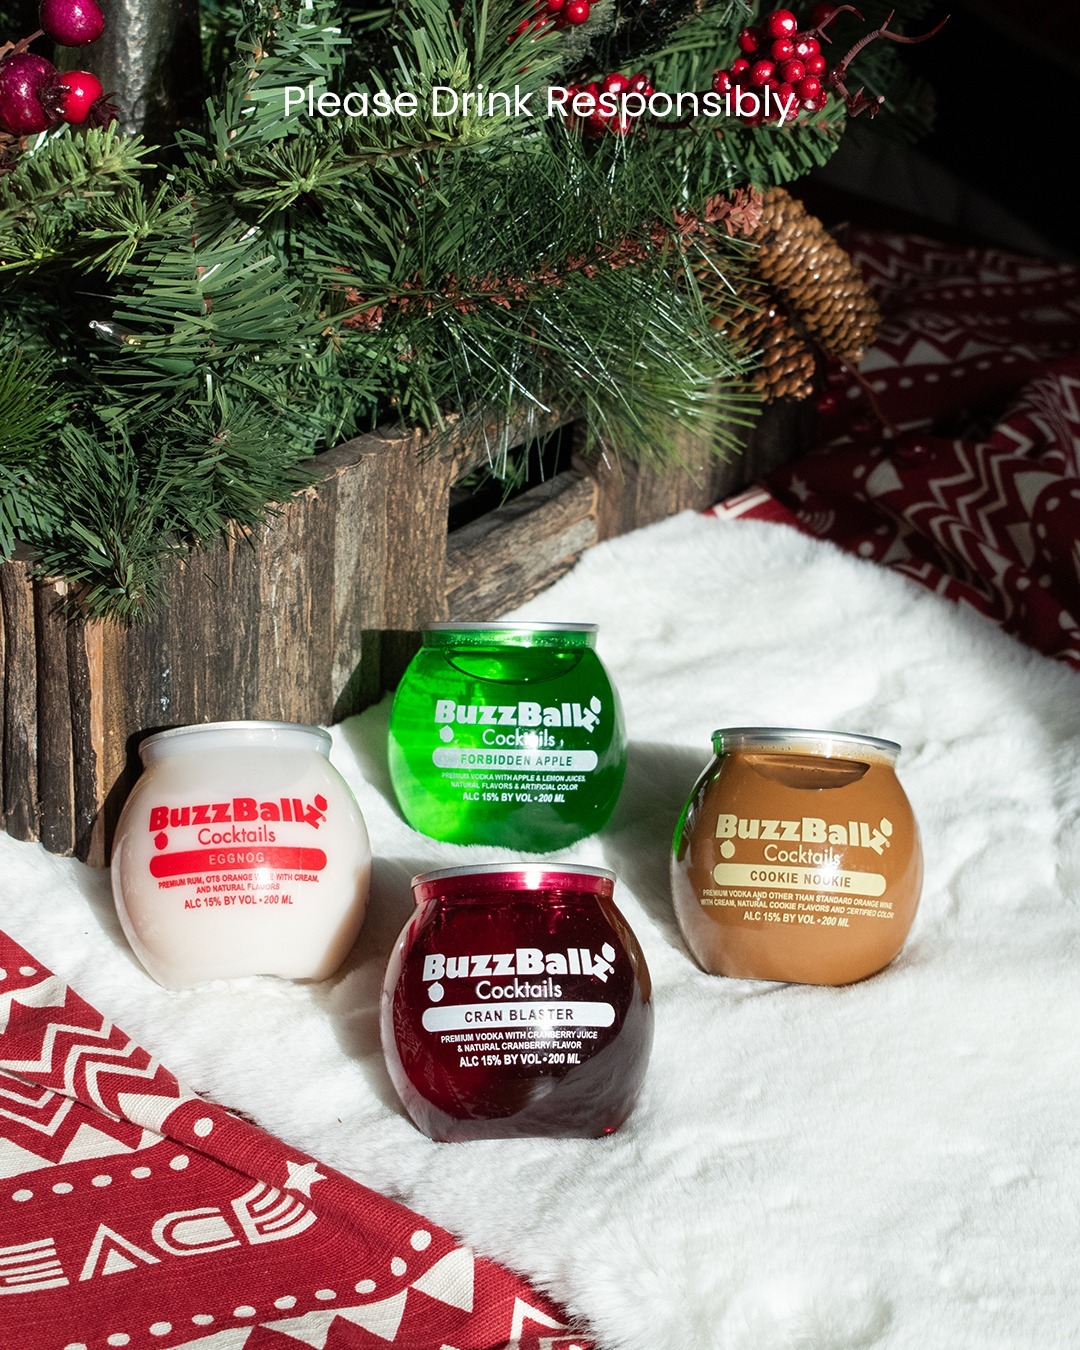 Exactly what we want to see under the tree 🤩 What is your favorite flavor for the holidays?